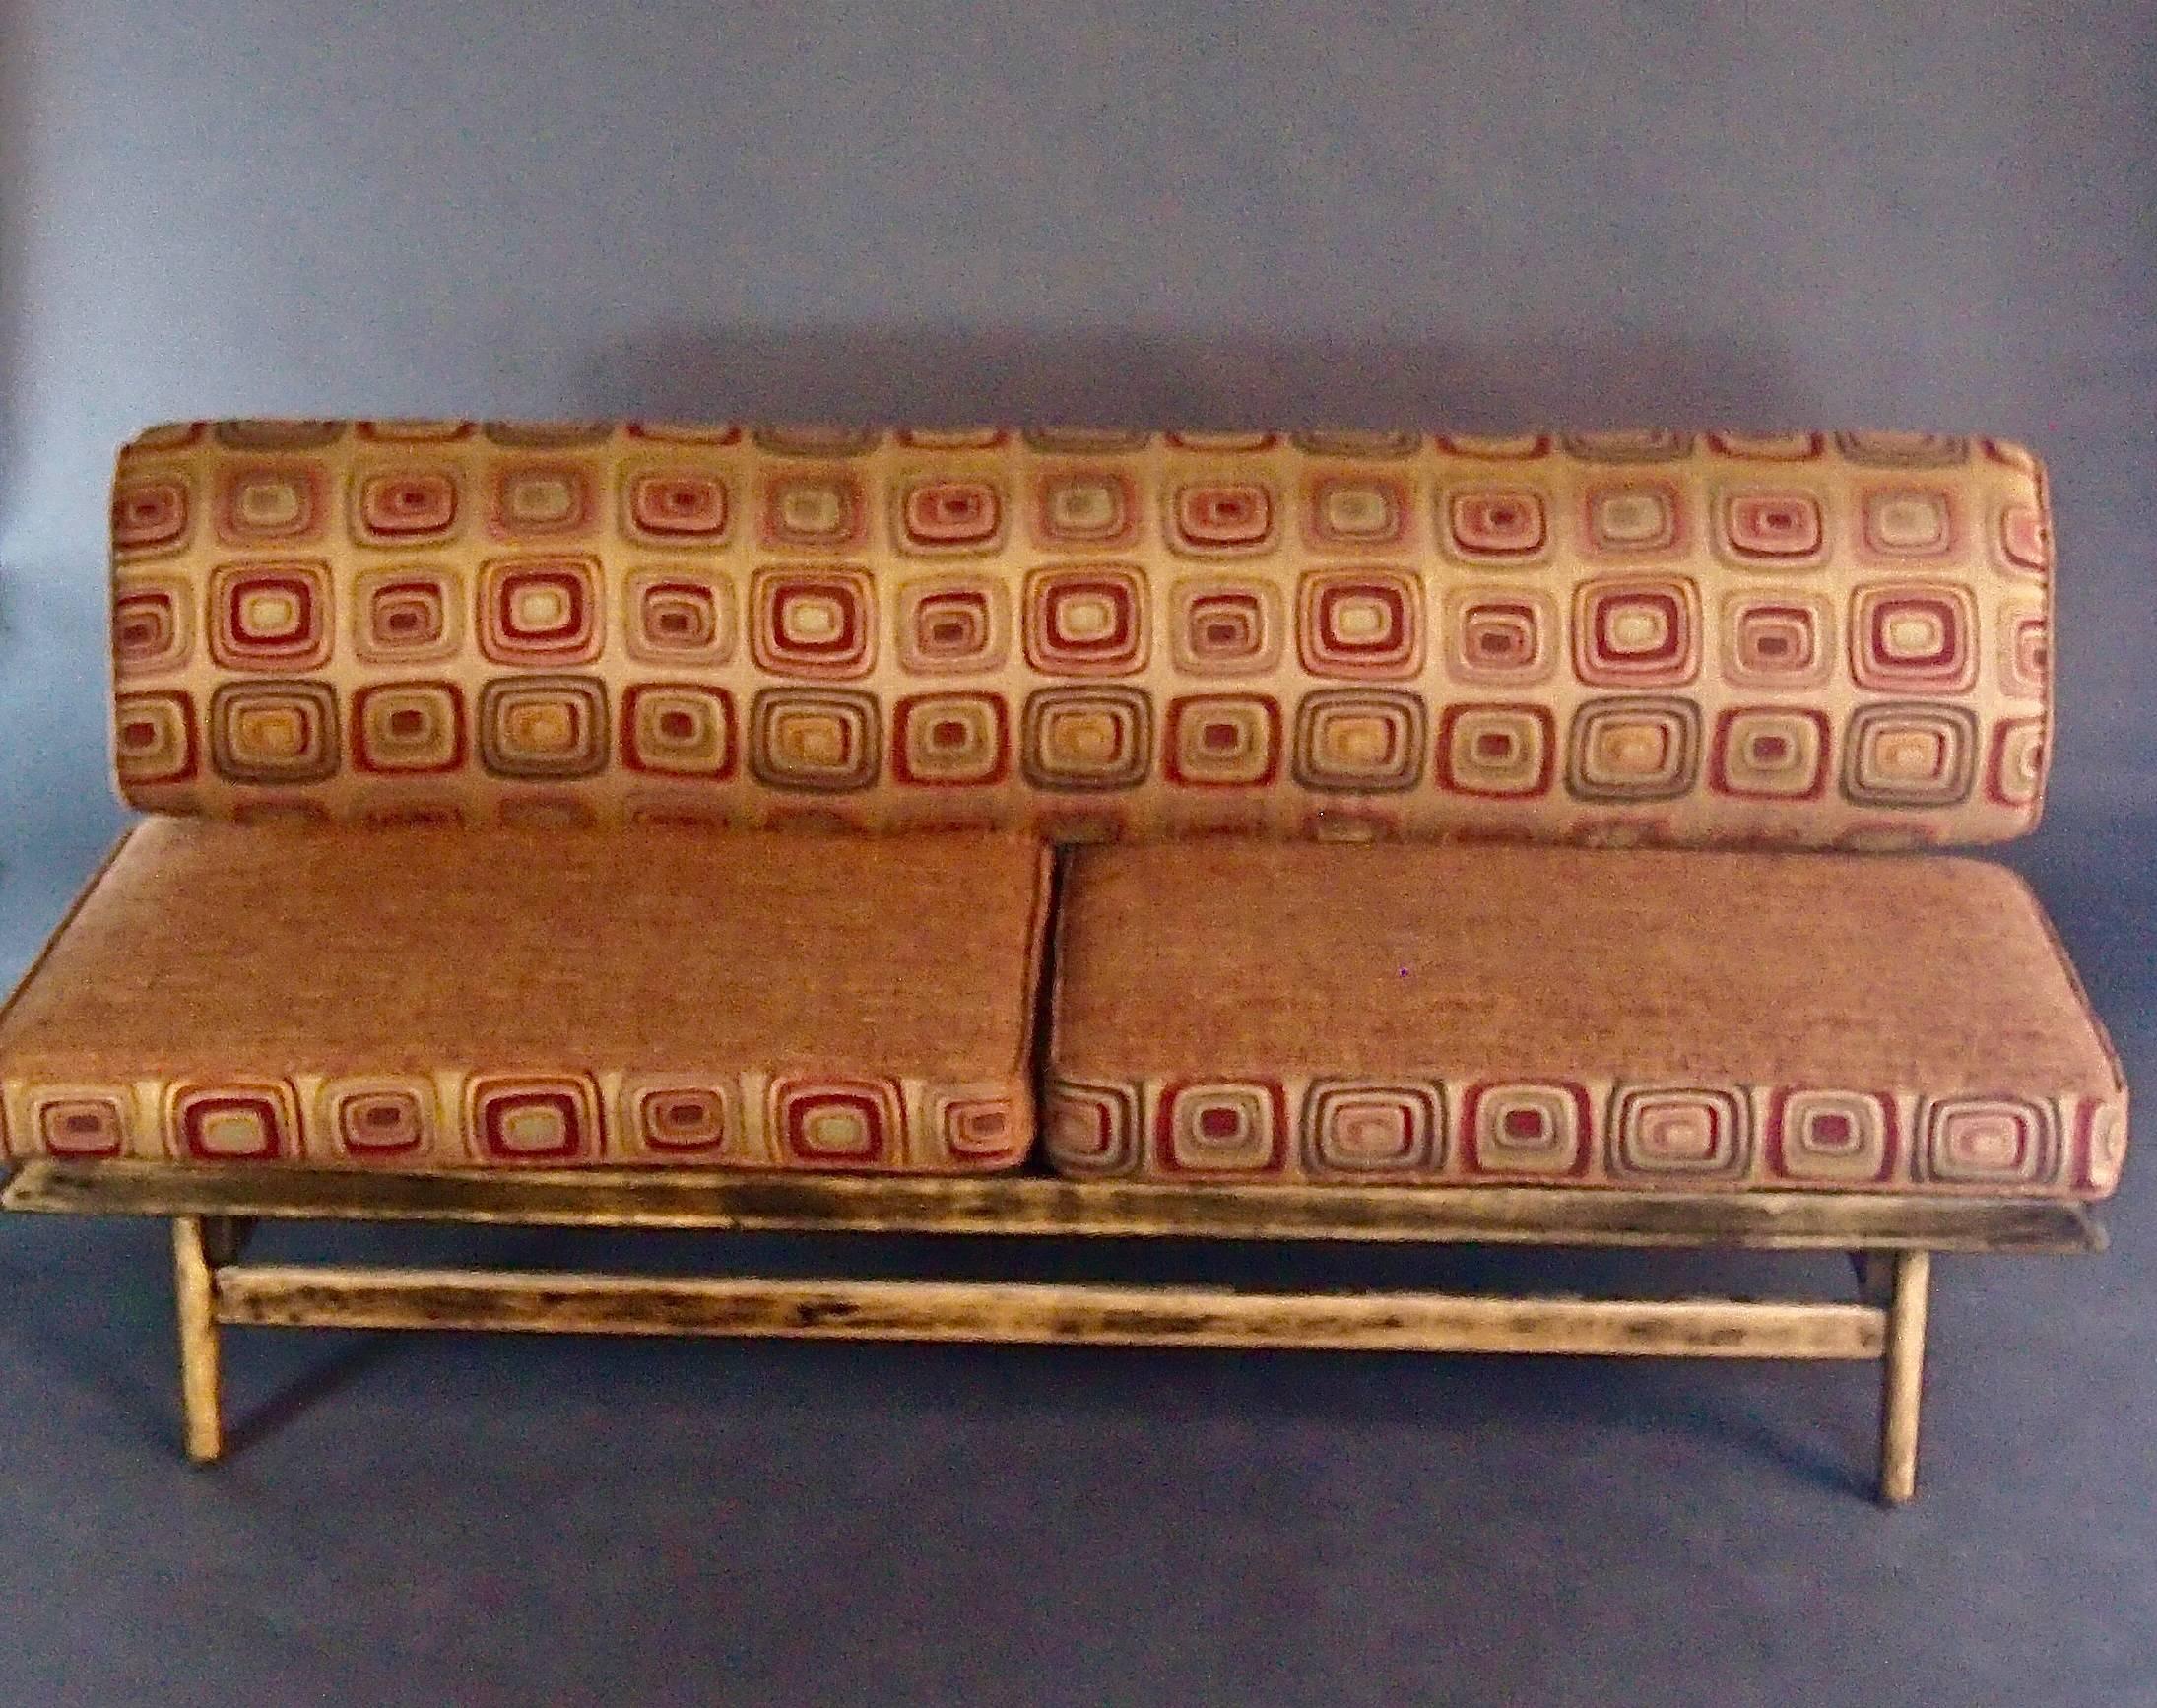 Unknown Mid-Century Slipper Sofa in Burnt Orange Tweed and Classic 60's Pattern-in stock